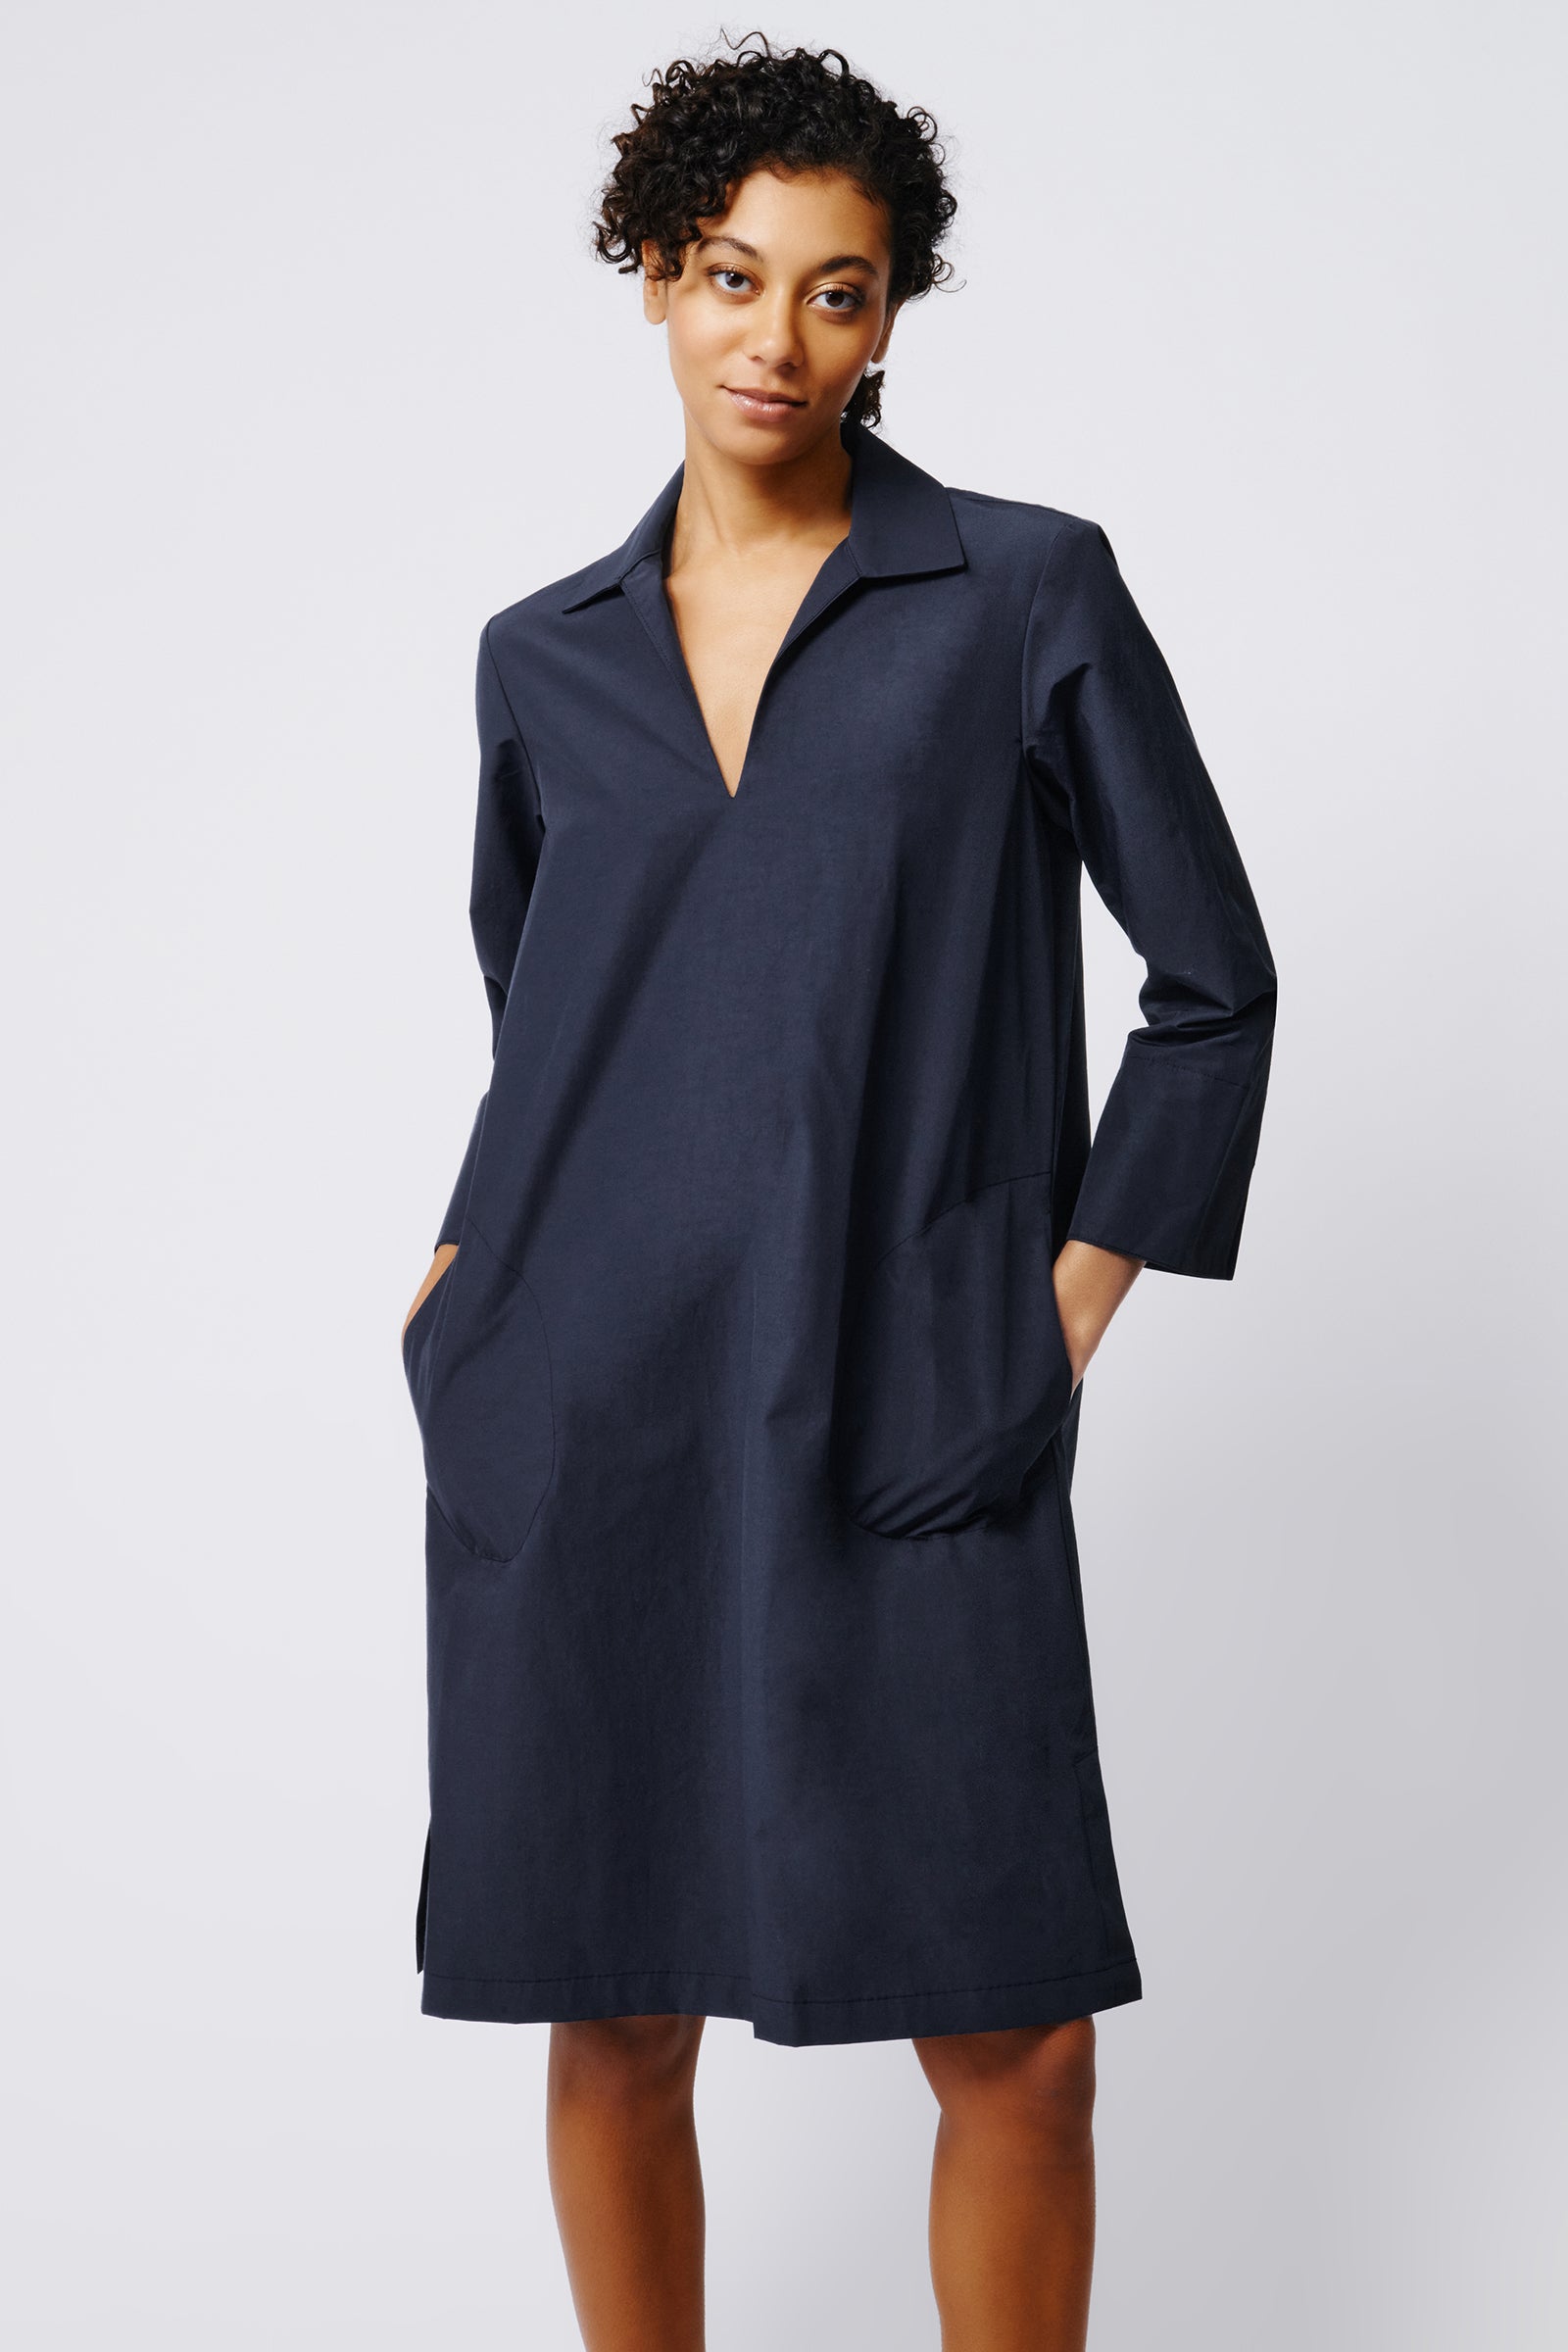 Kal Rieman Collared V Neck Dress in Navy Broadcloth on Model Front View Crop 5